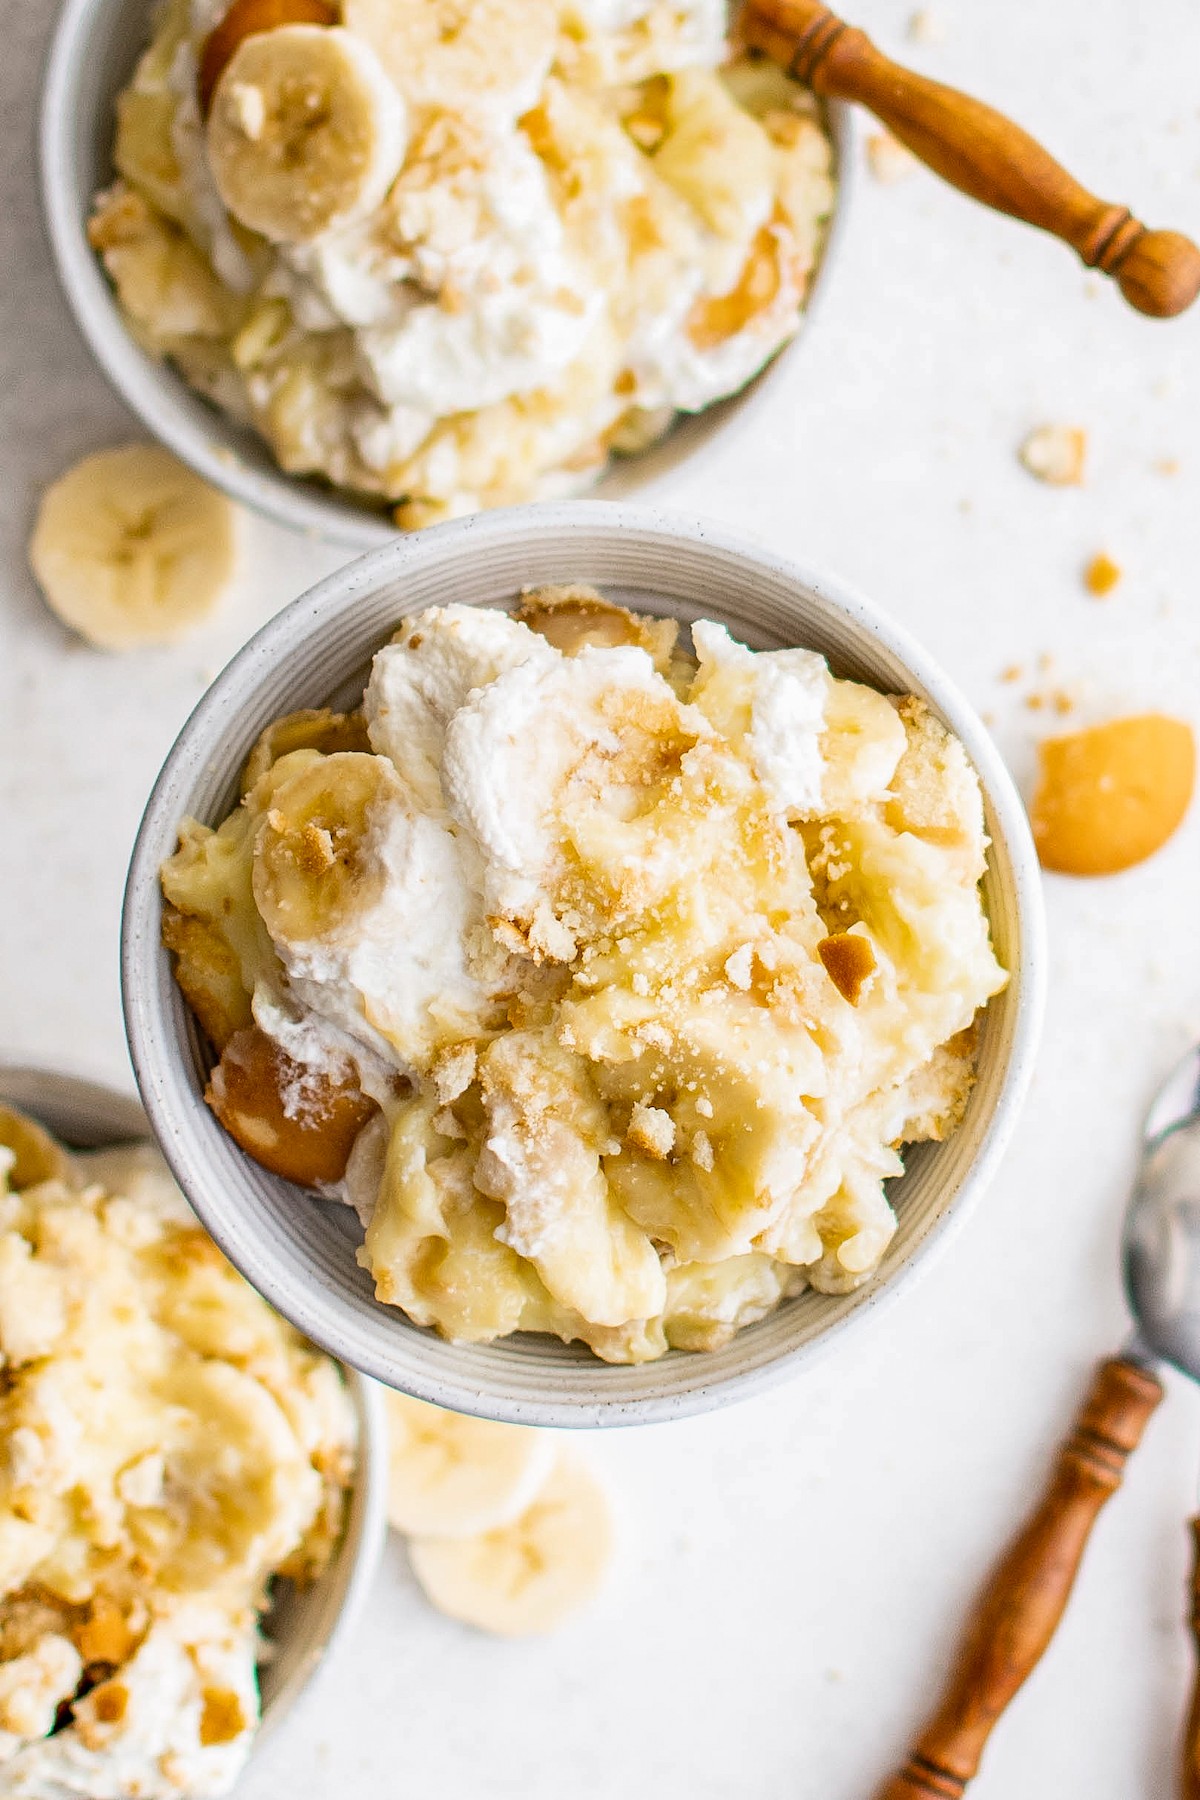 Servings of banana pudding in small bowls with wooden-handled spoons.